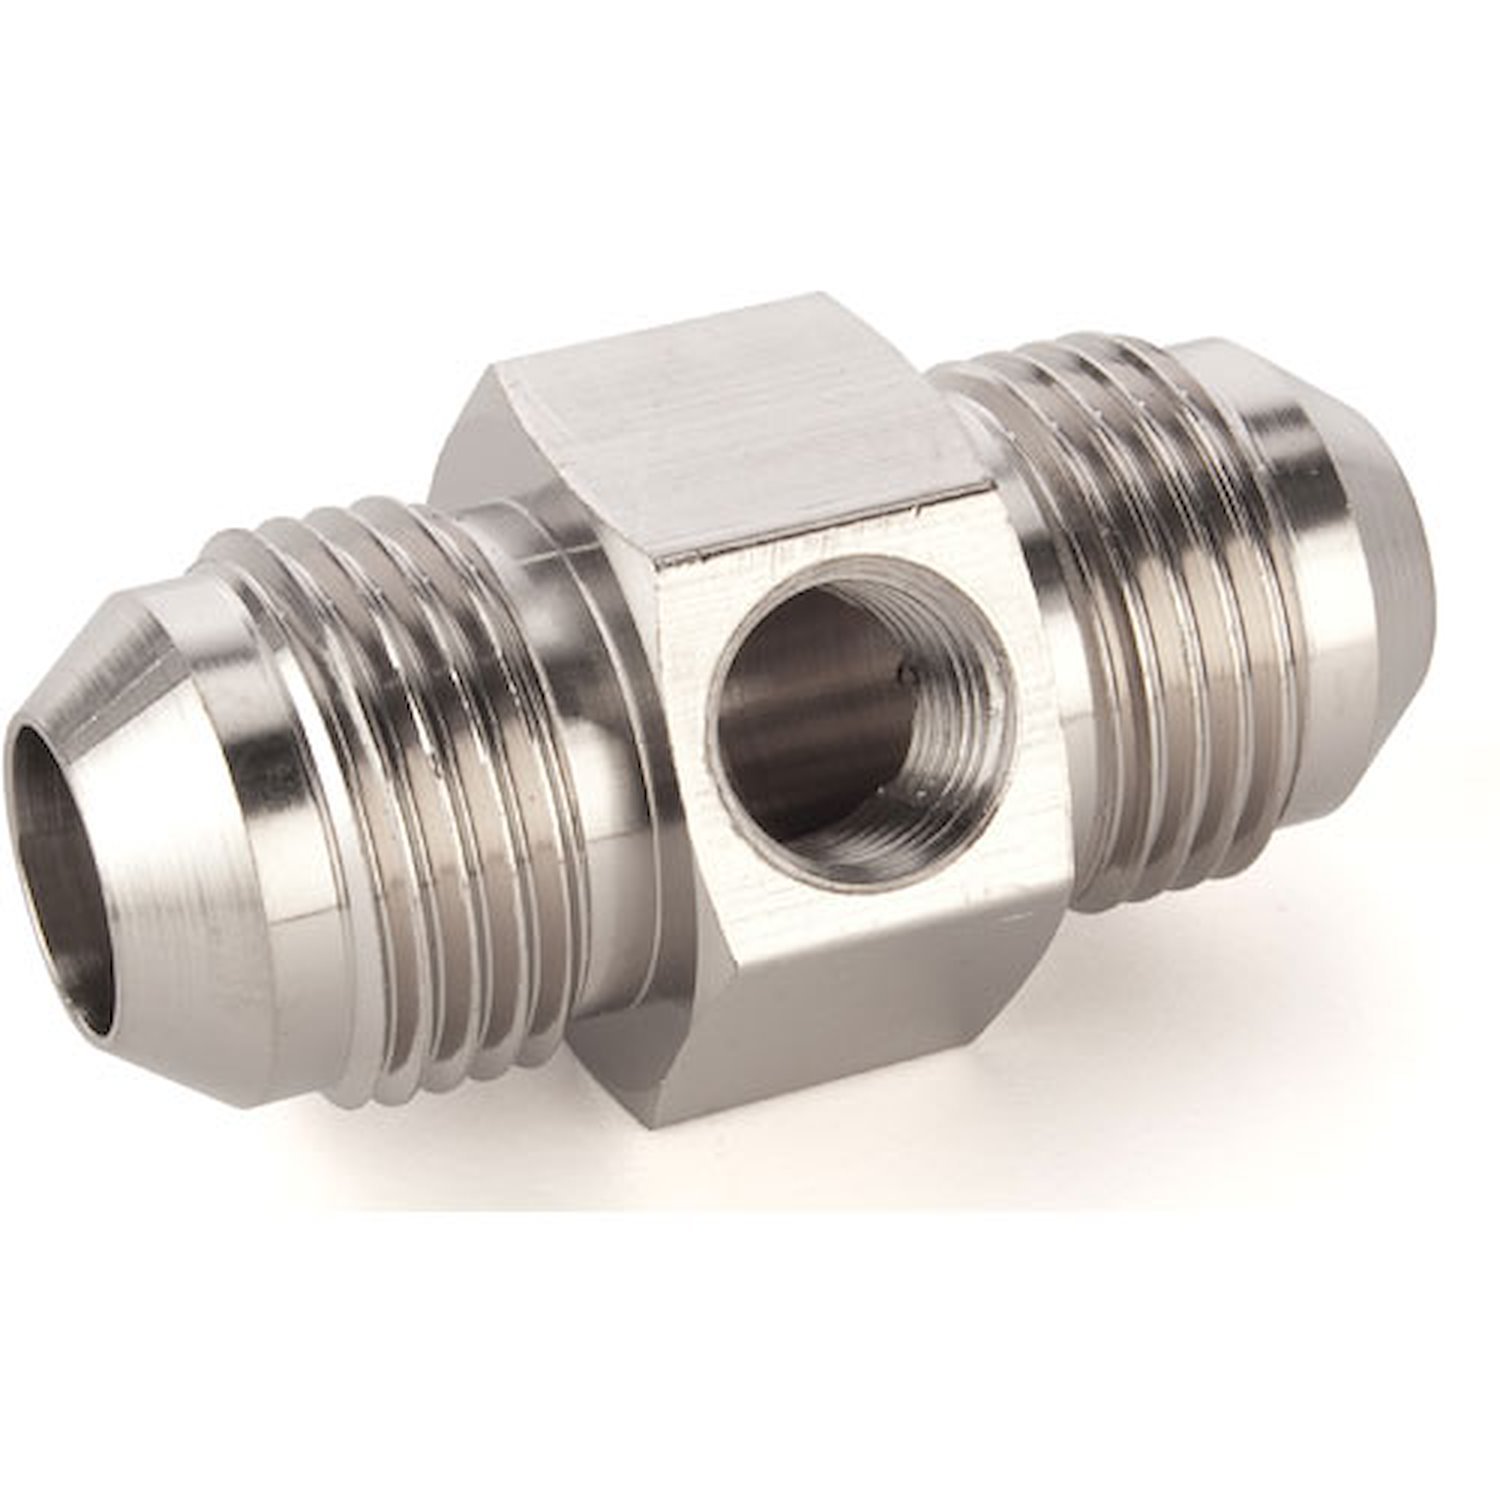 Fuel Pressure Adapter Fitting -8AN Union